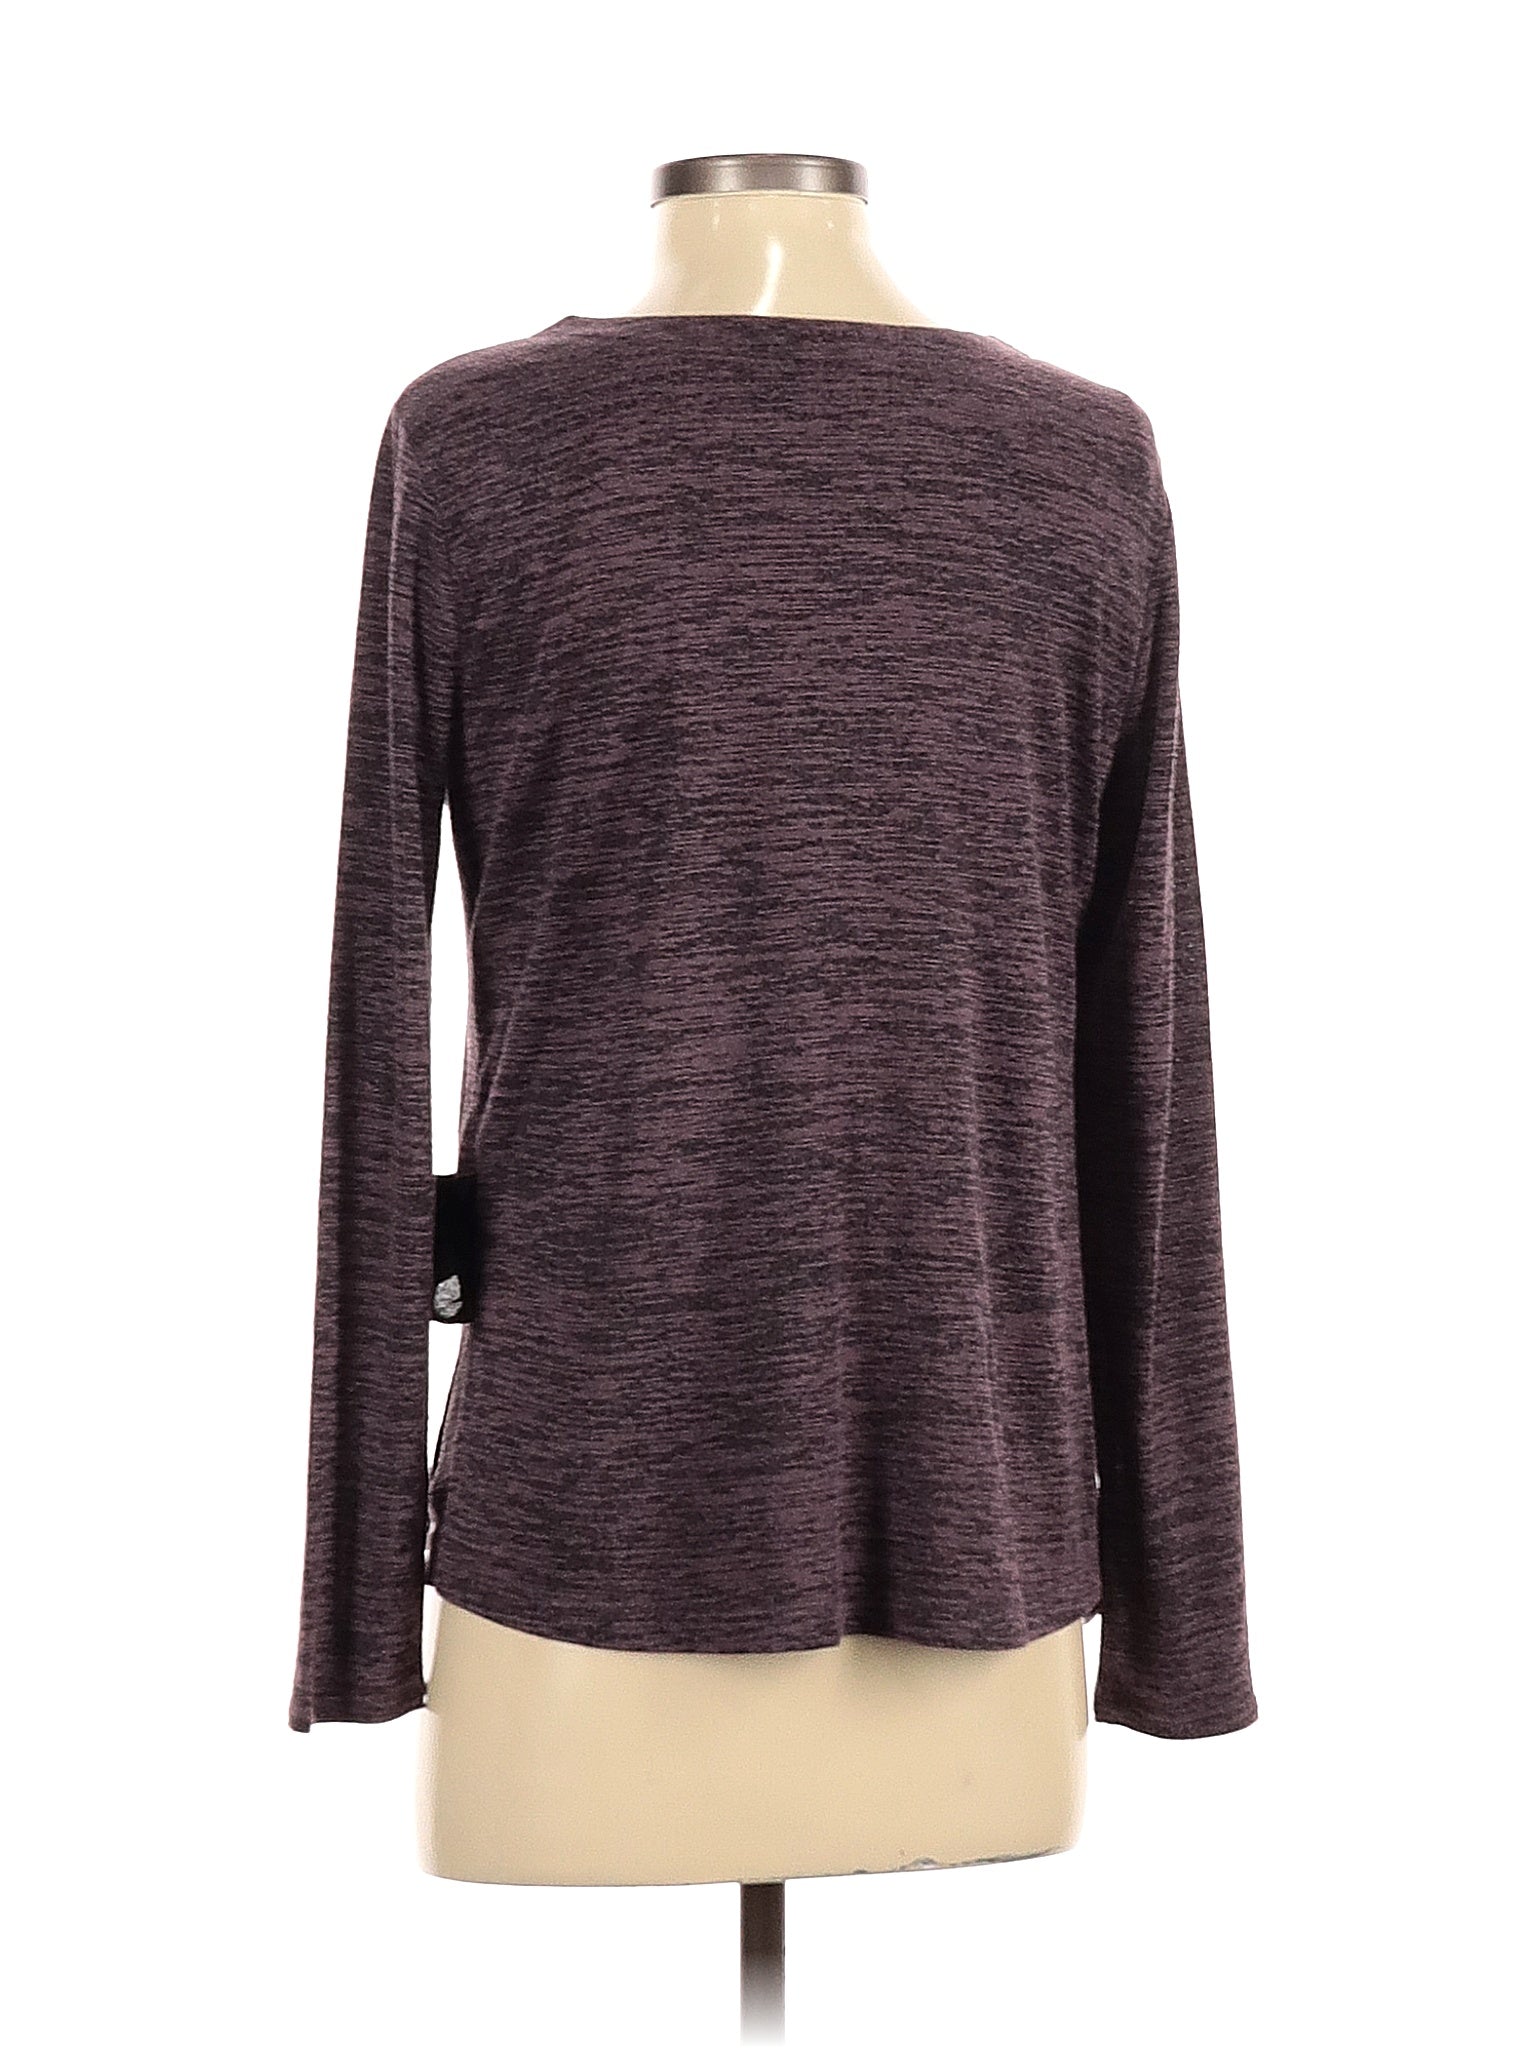 Long Sleeve Top size - S P